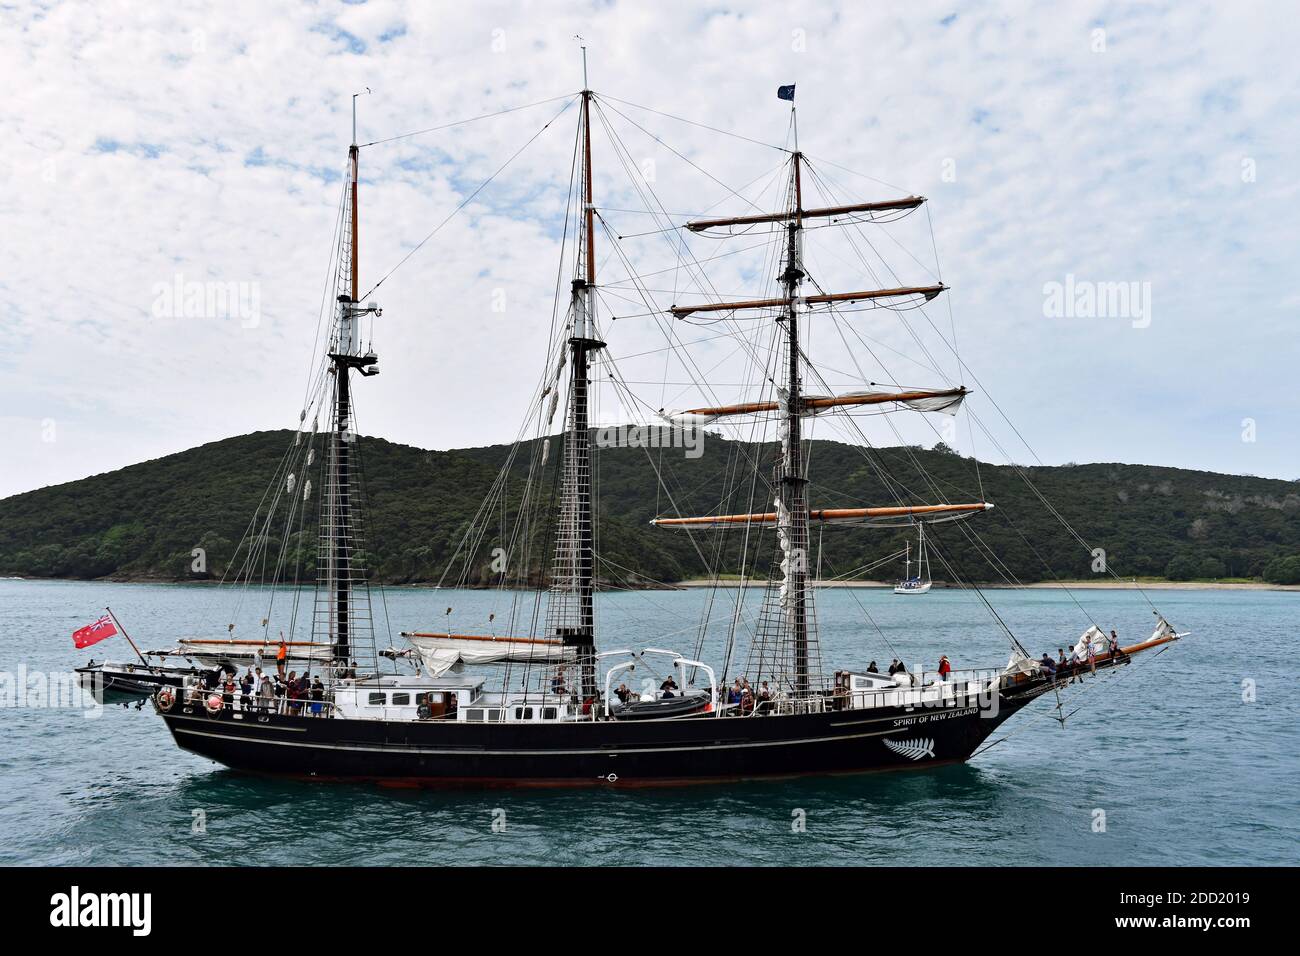 The tall ship Spirit of New Zealand, a steel-hulled, three-masted barquentine. Built for youth development. Pictured in Bay of Islands, New Zealand Stock Photo